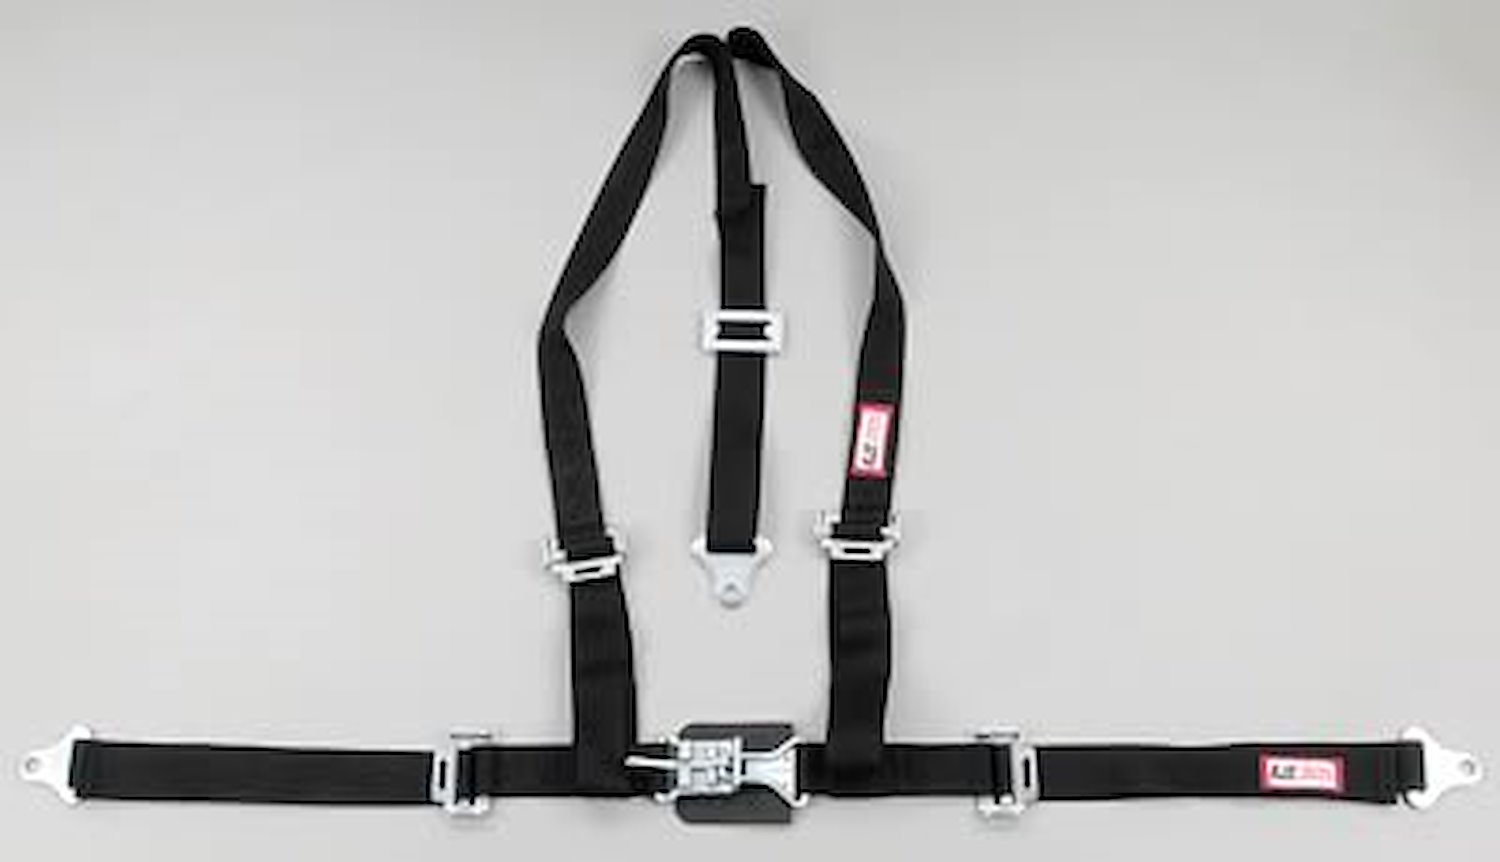 NON-SFI L&L HARNESS 3 PULL DOWN Lap Belt BOLT SEWN IN 2 S.H. Y FLOOR Mount w/STERNUM STRAP WRAP/BOLT HOT PINK